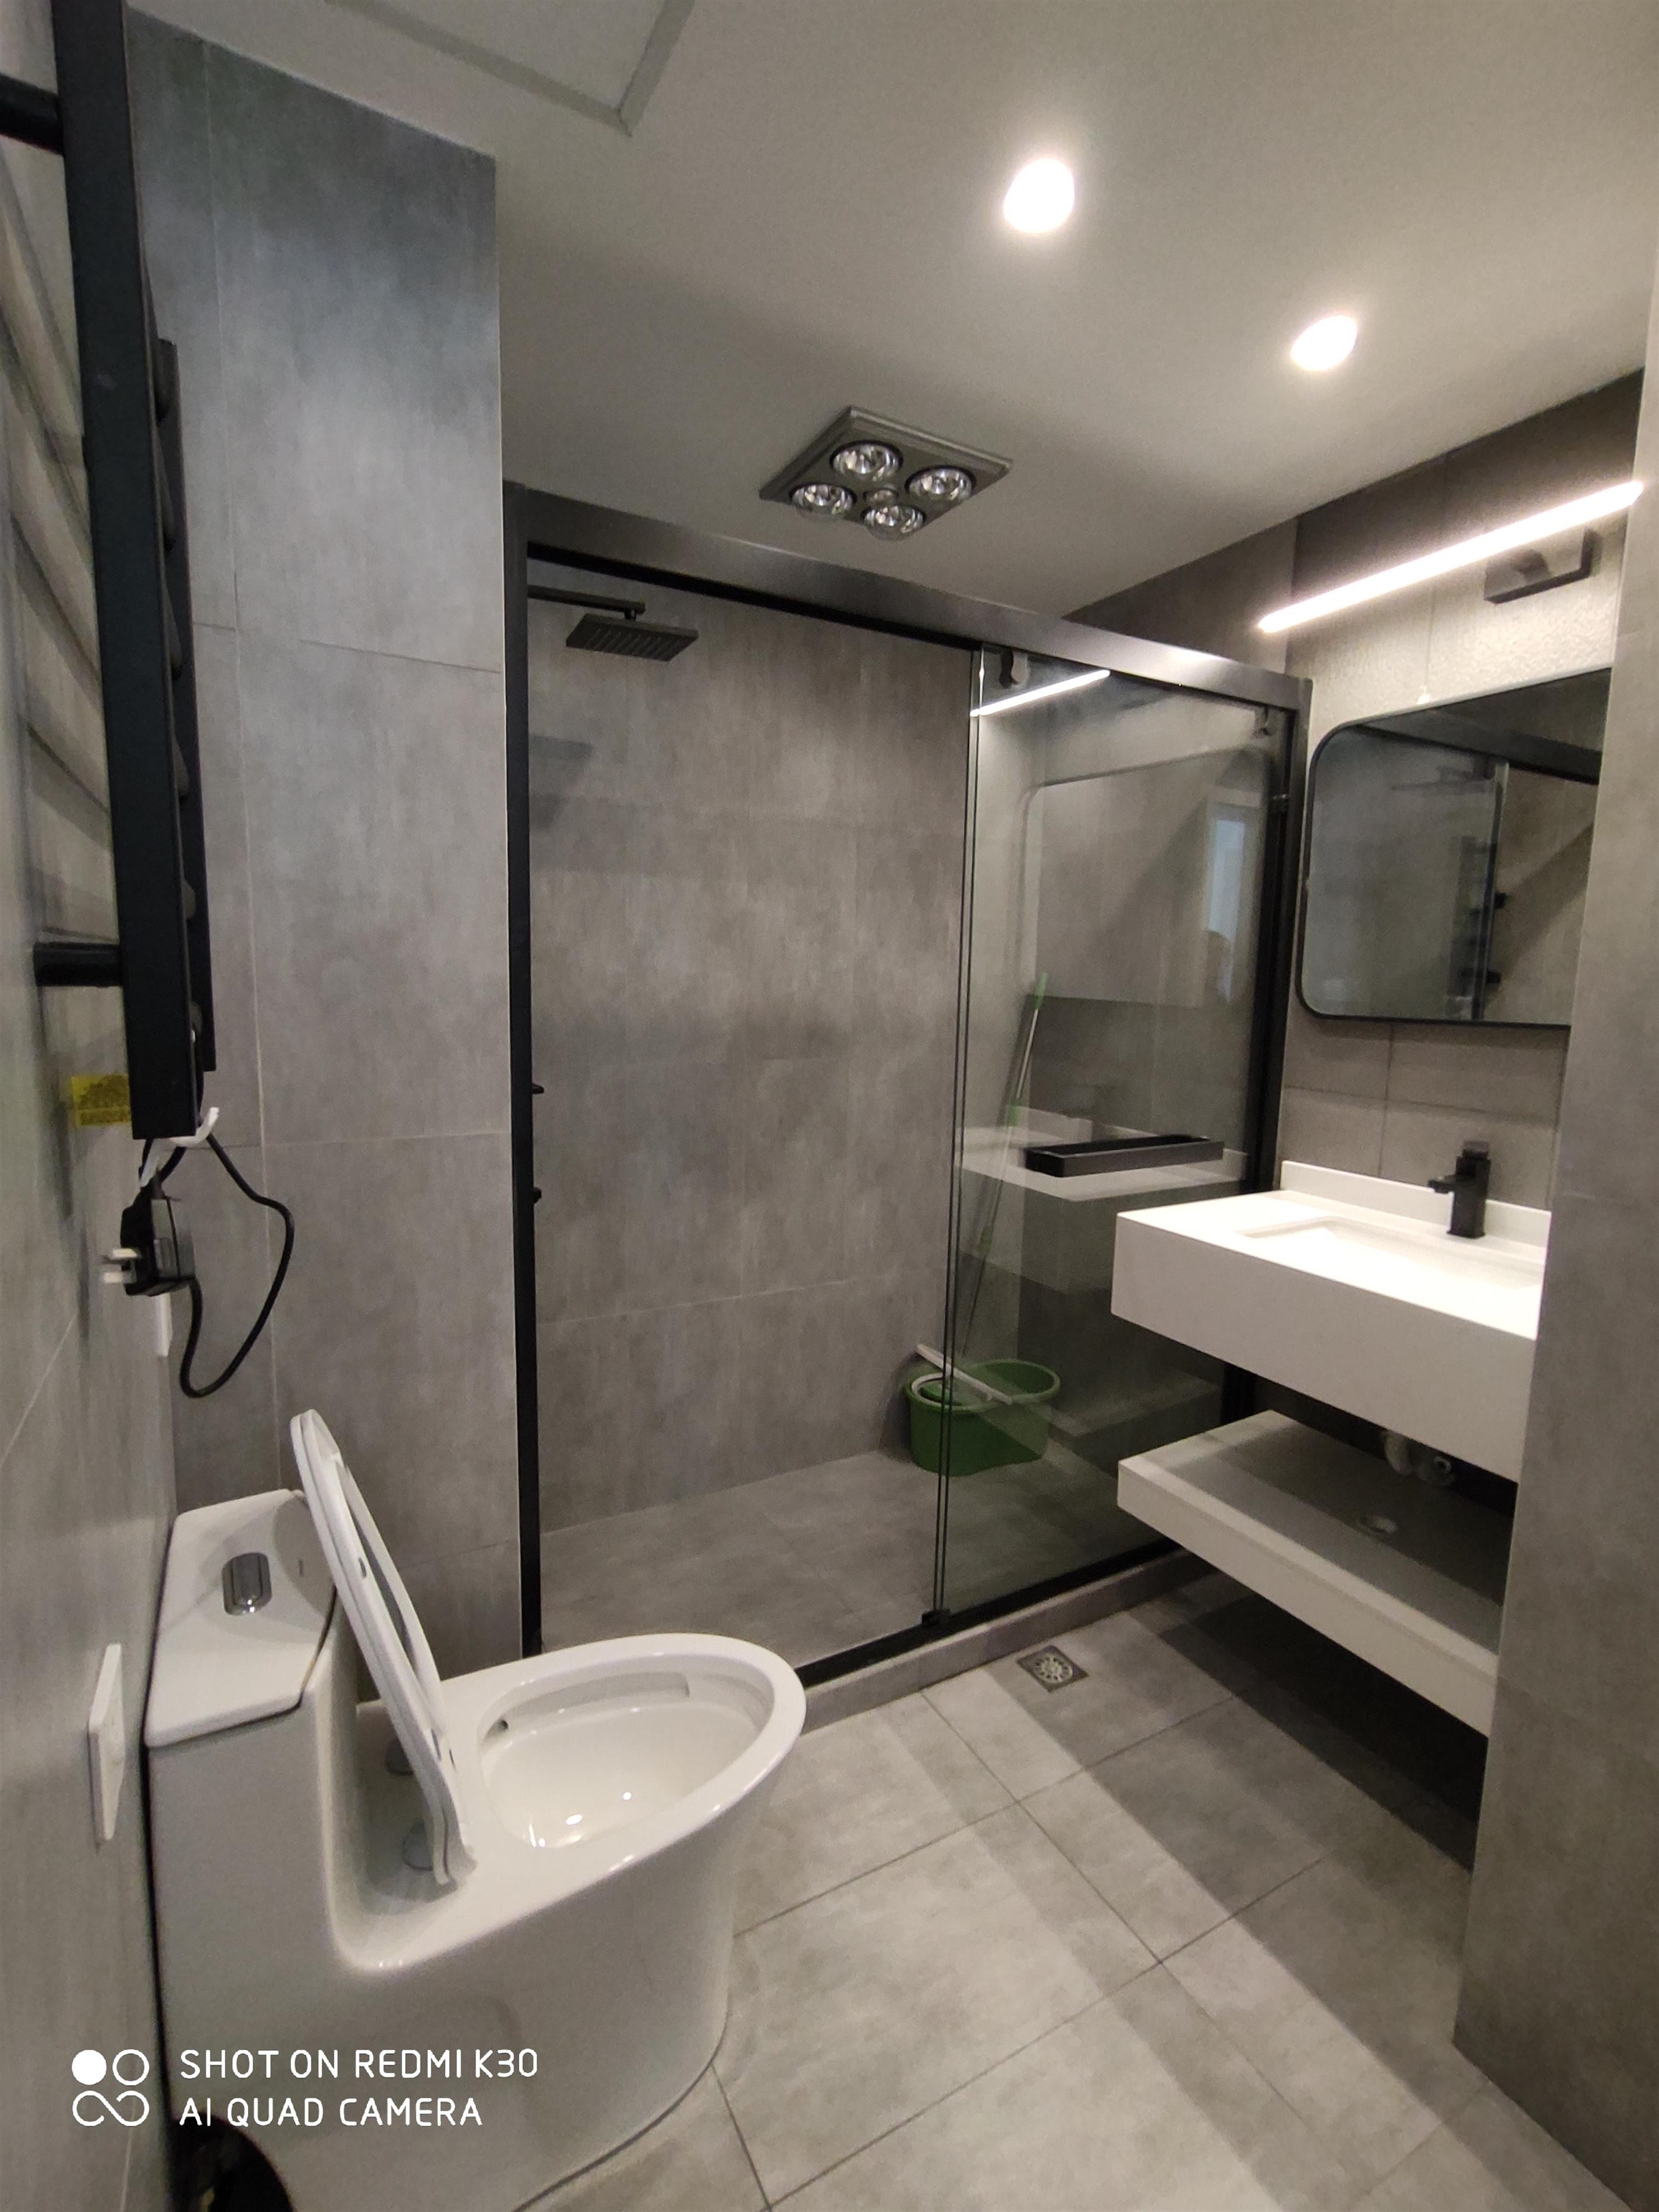 wall heating Newly Renovated Spacious Convenient 3BR FFC Apartment nr LN 8/9/10/13 for Rent in Shanghai